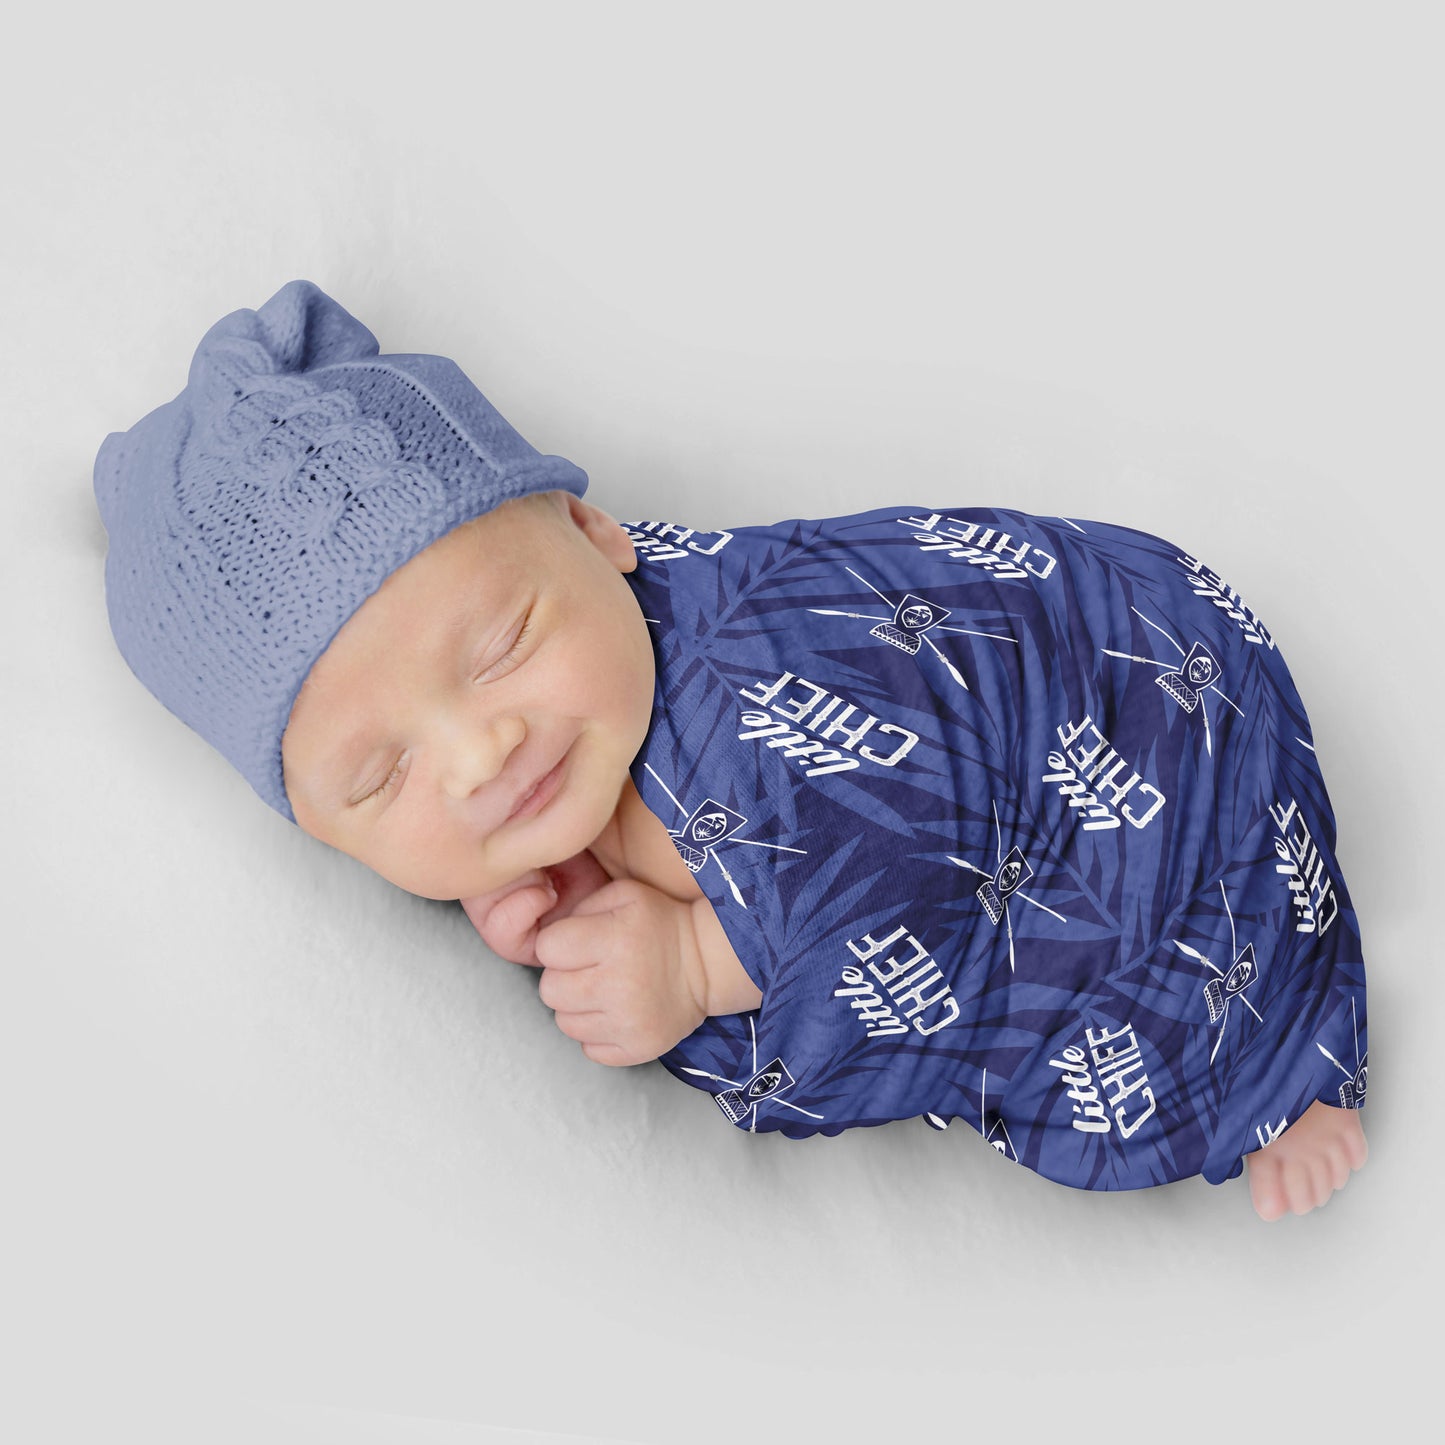 Little Chief Blue Baby Swaddle Blanket